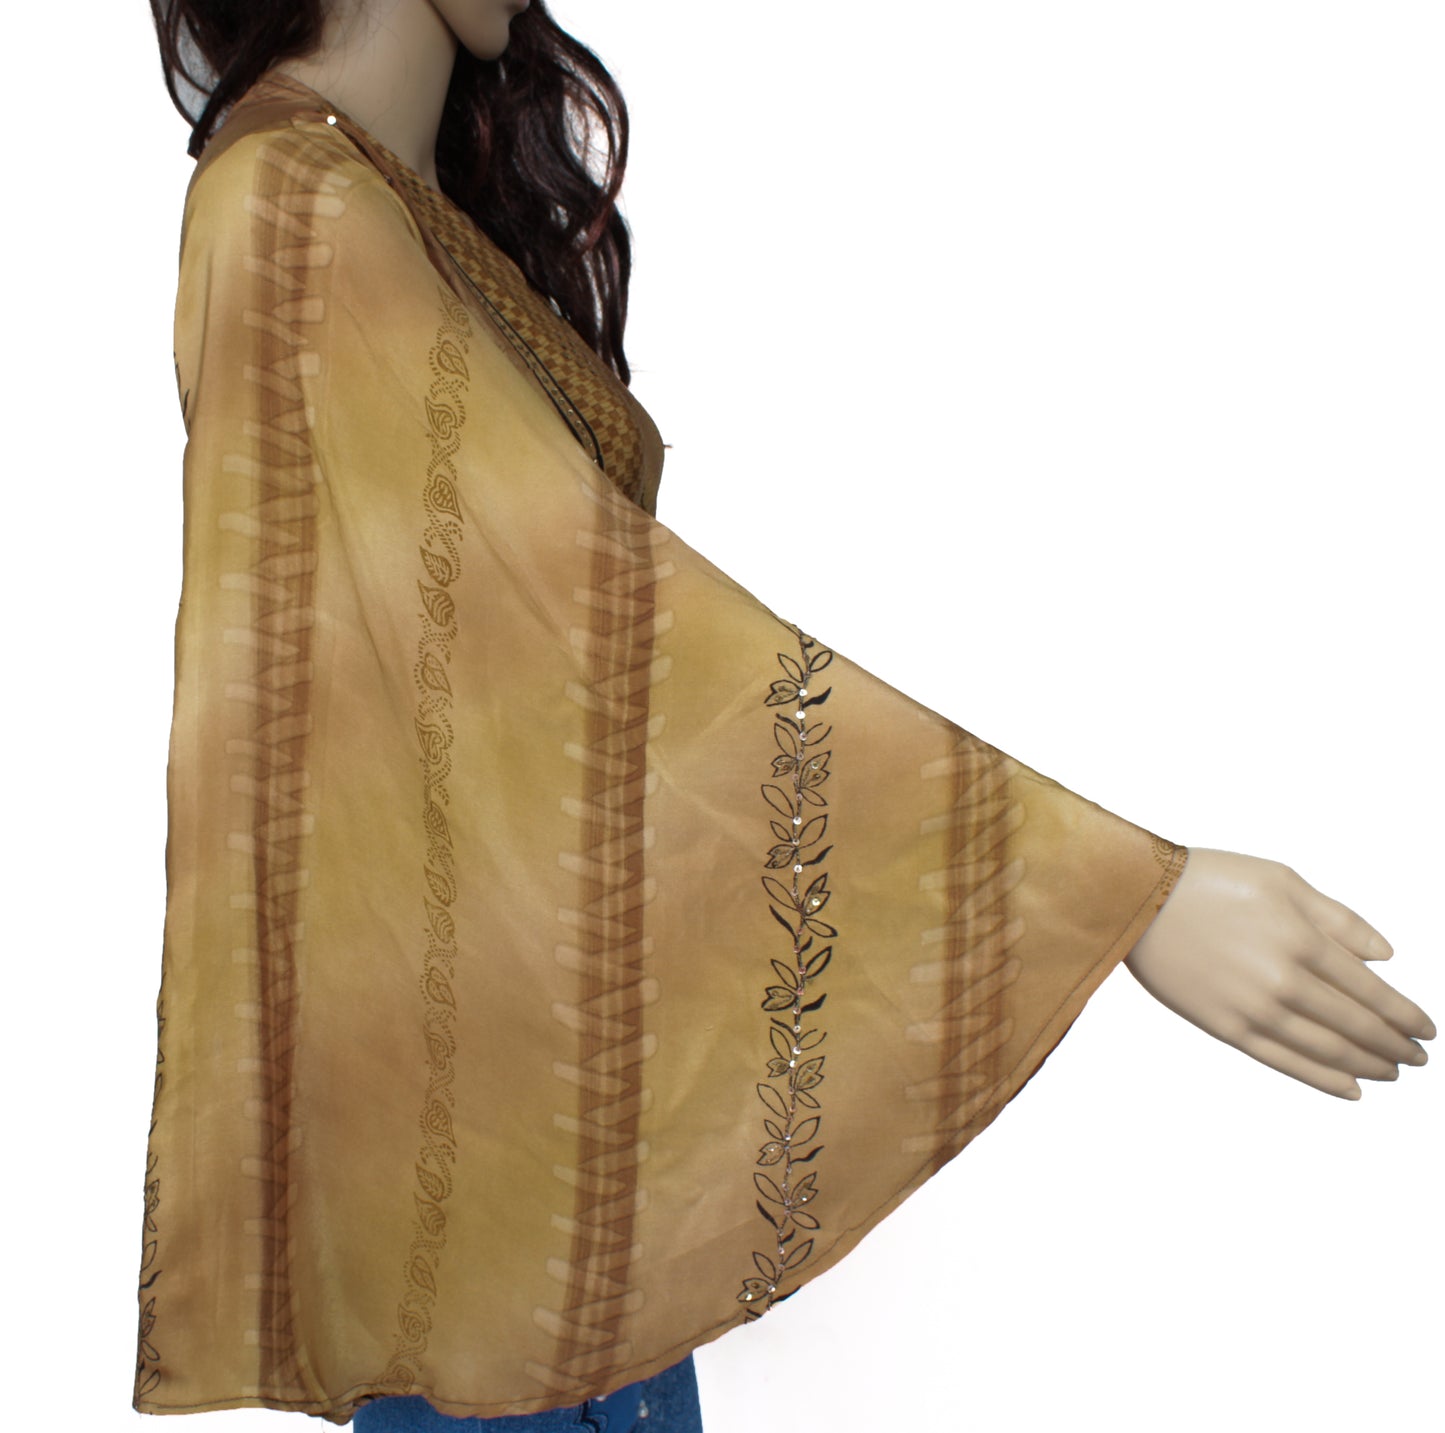 Sushila Vintage Bohemian Bell Sleeve Recycled Silk Saree Top 70,s Retro Brown